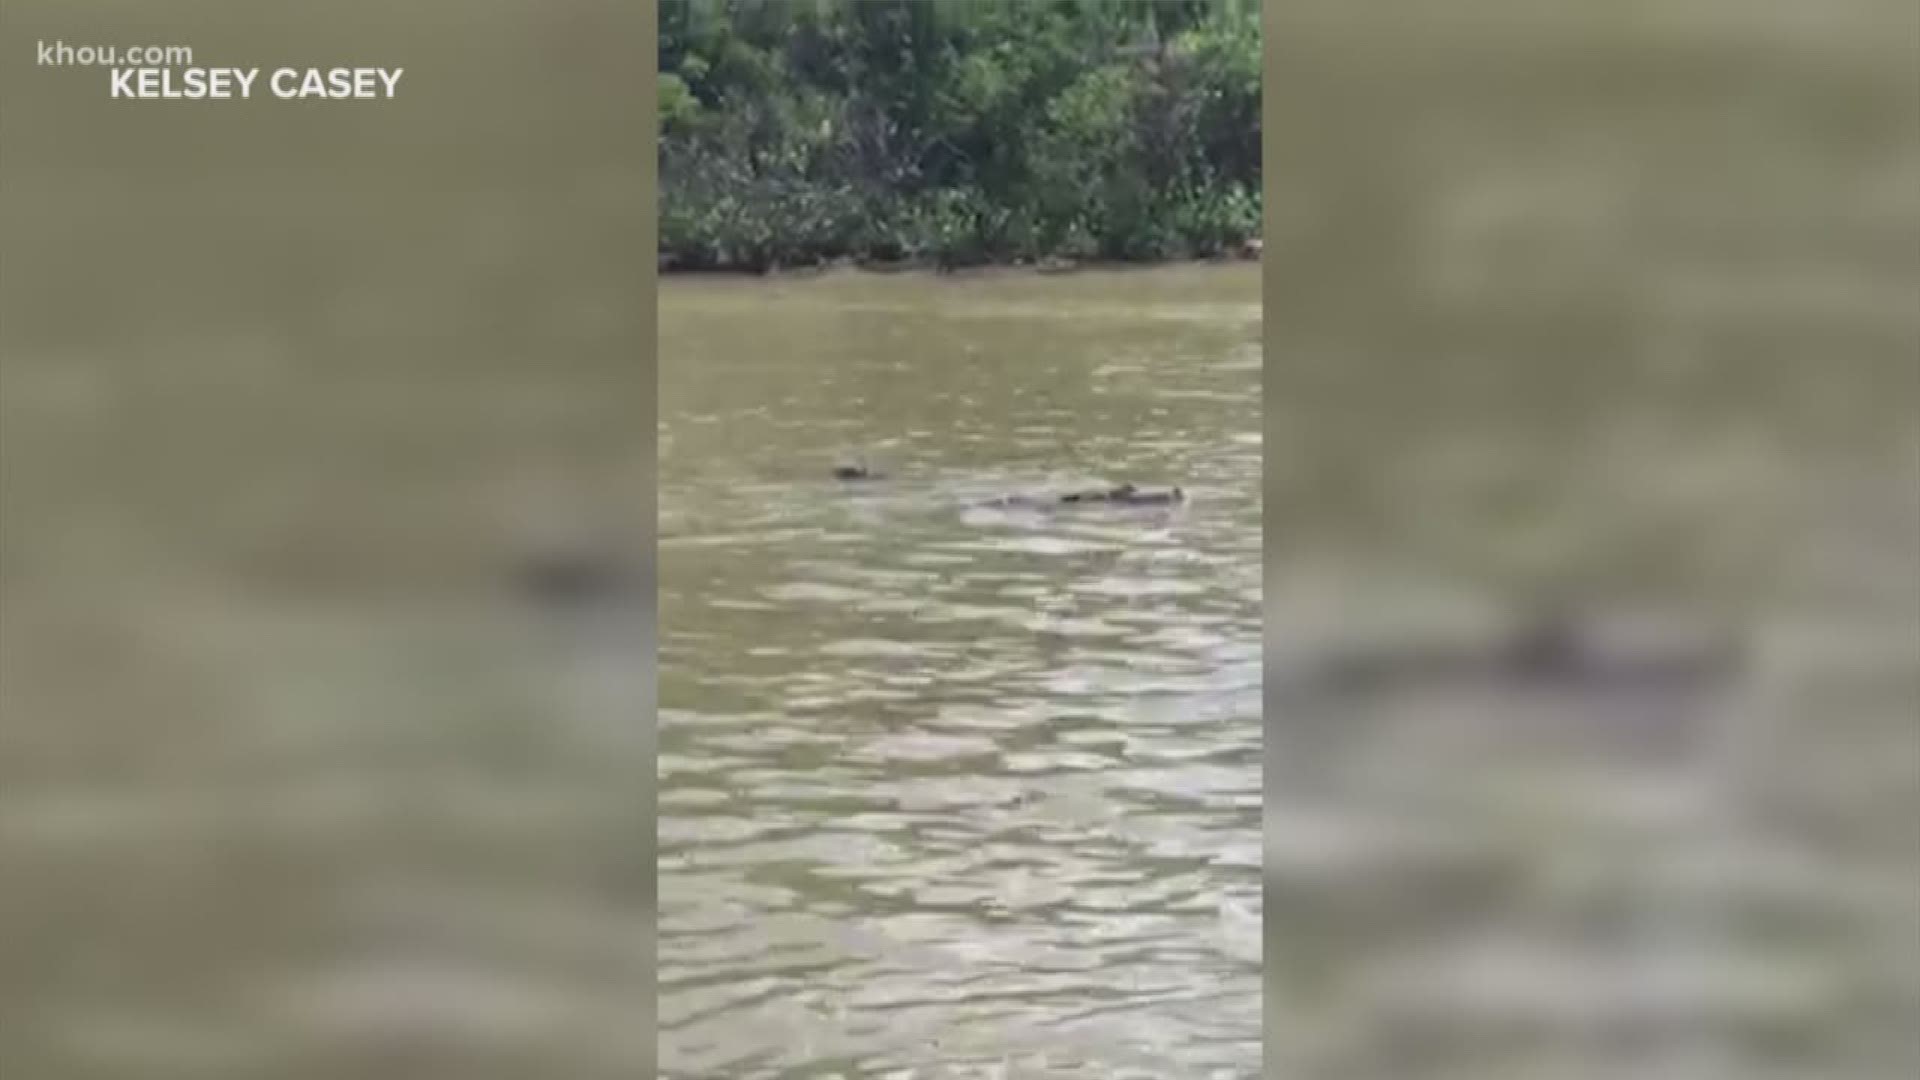 A KHOU 11 viewer spotted a gator in Lake Conroe!